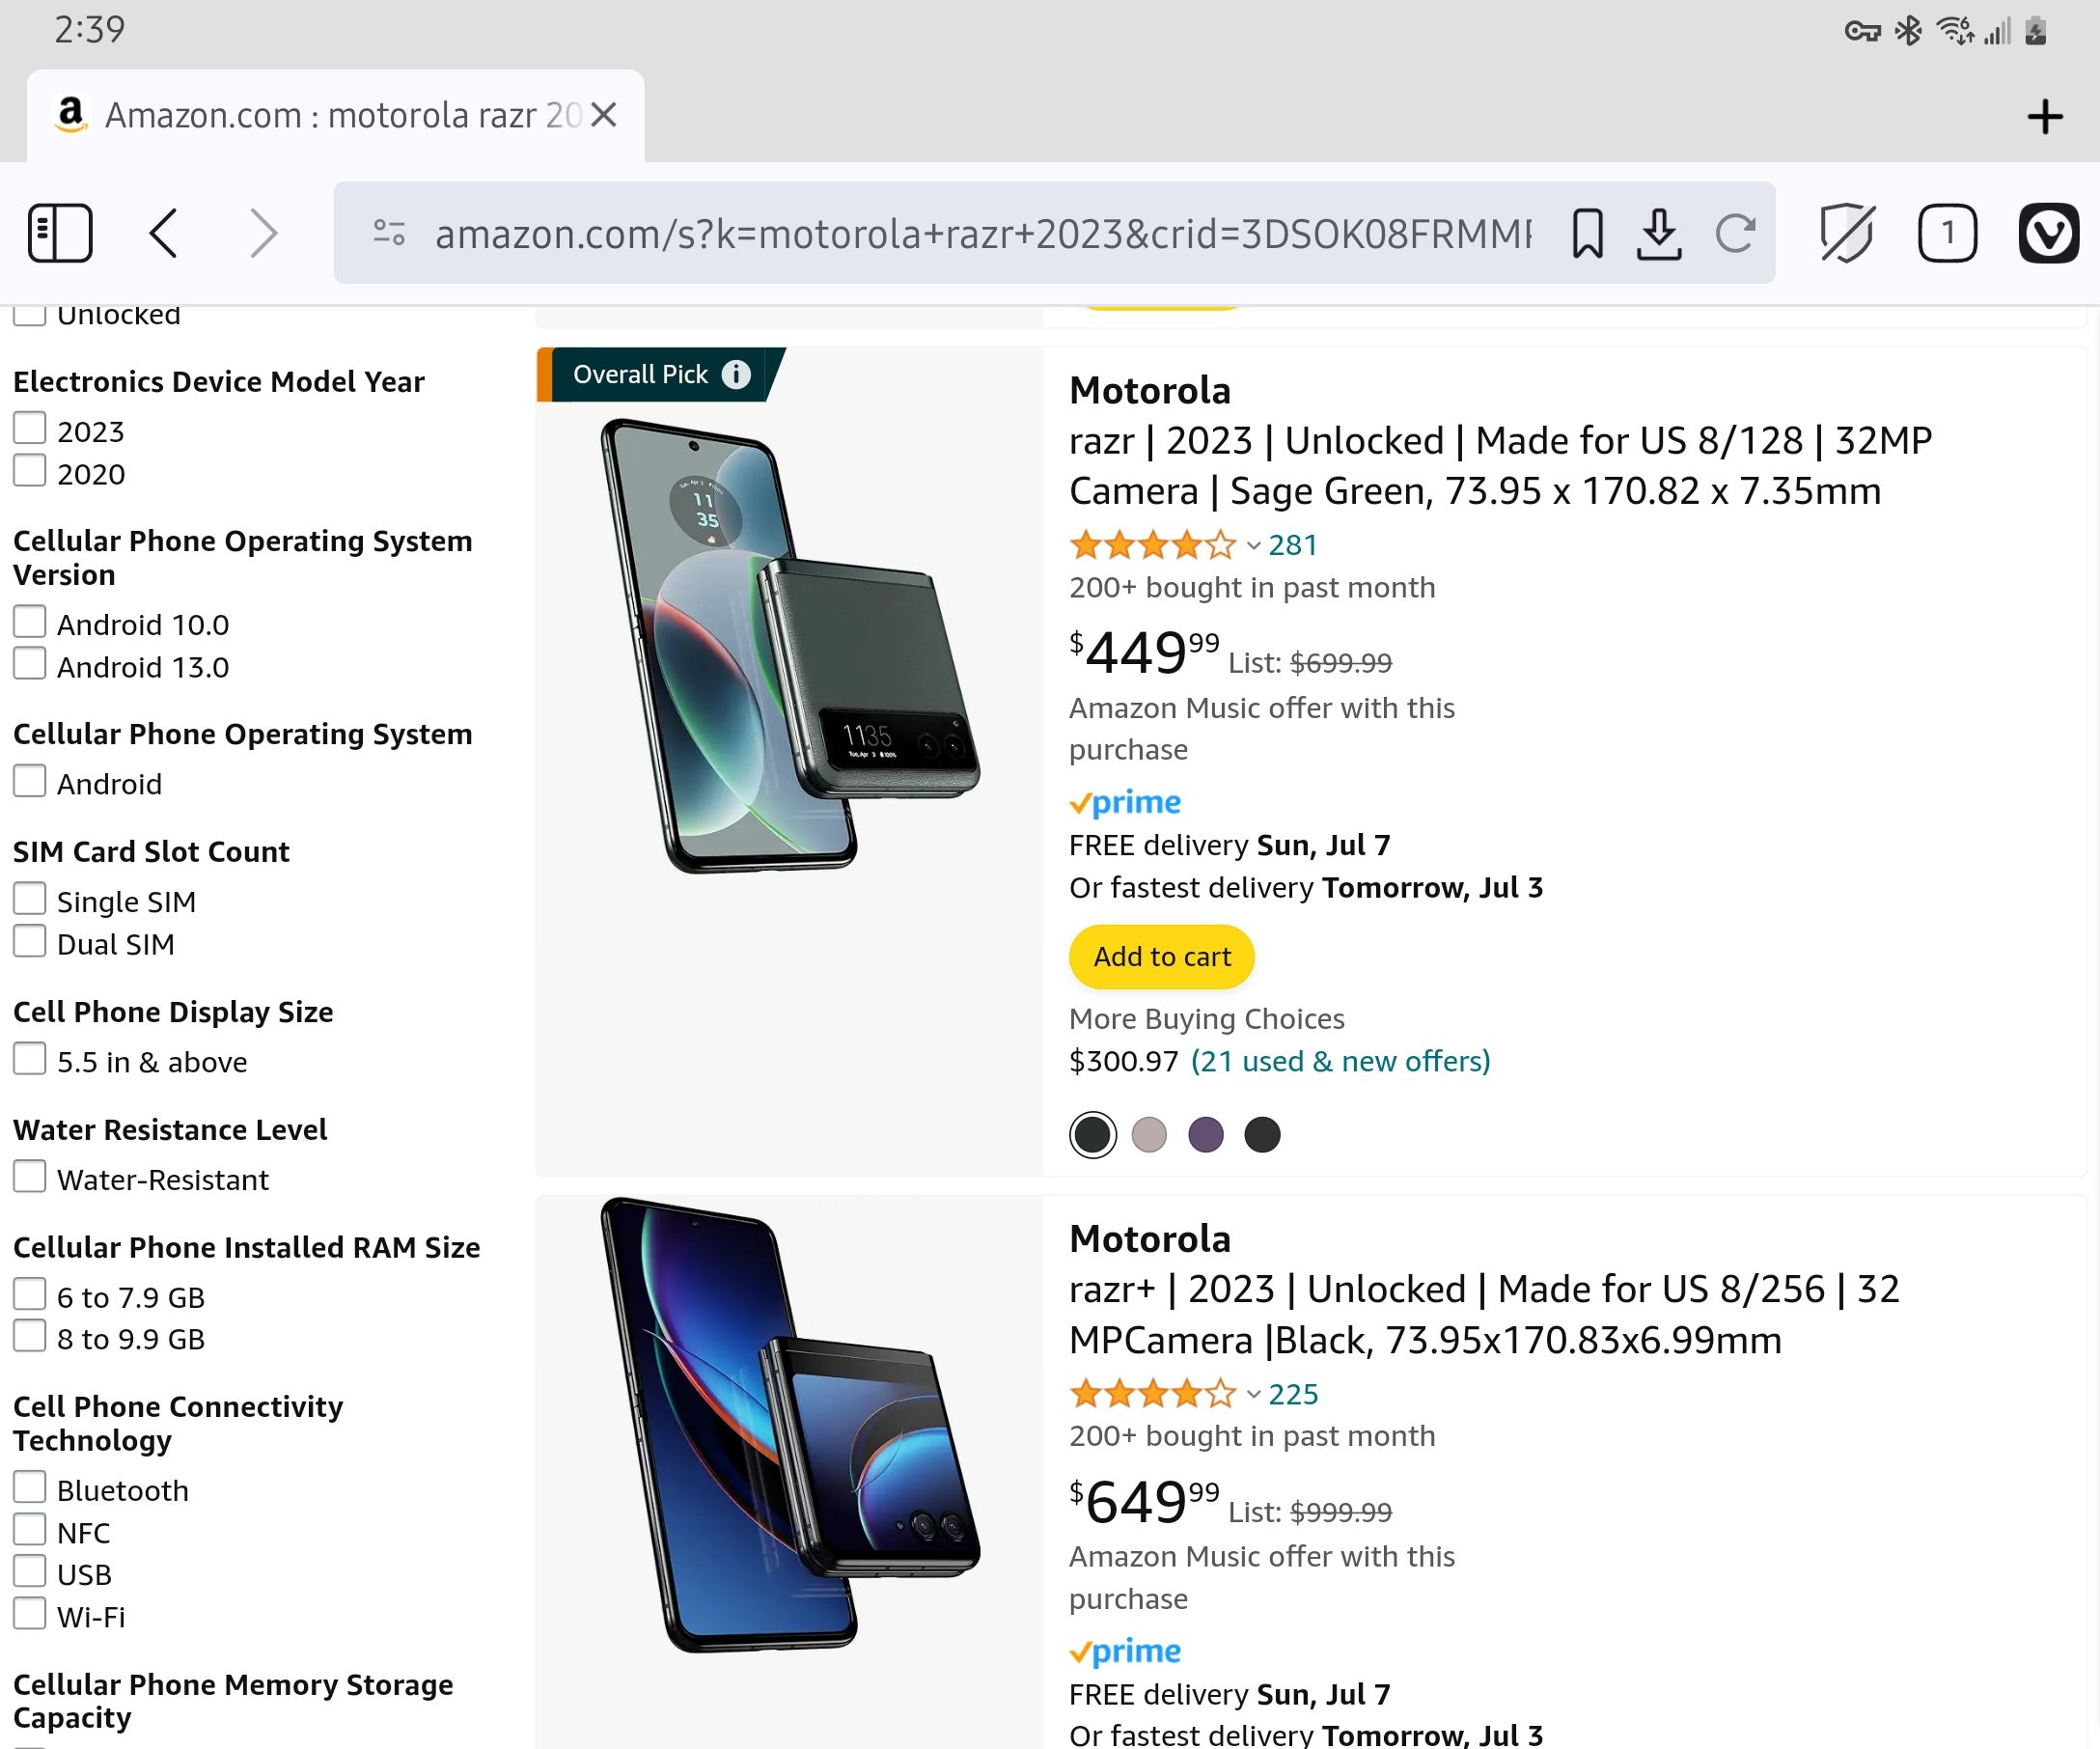 The Motorola Razr and Razr+ available for discounted prices on Amazon.